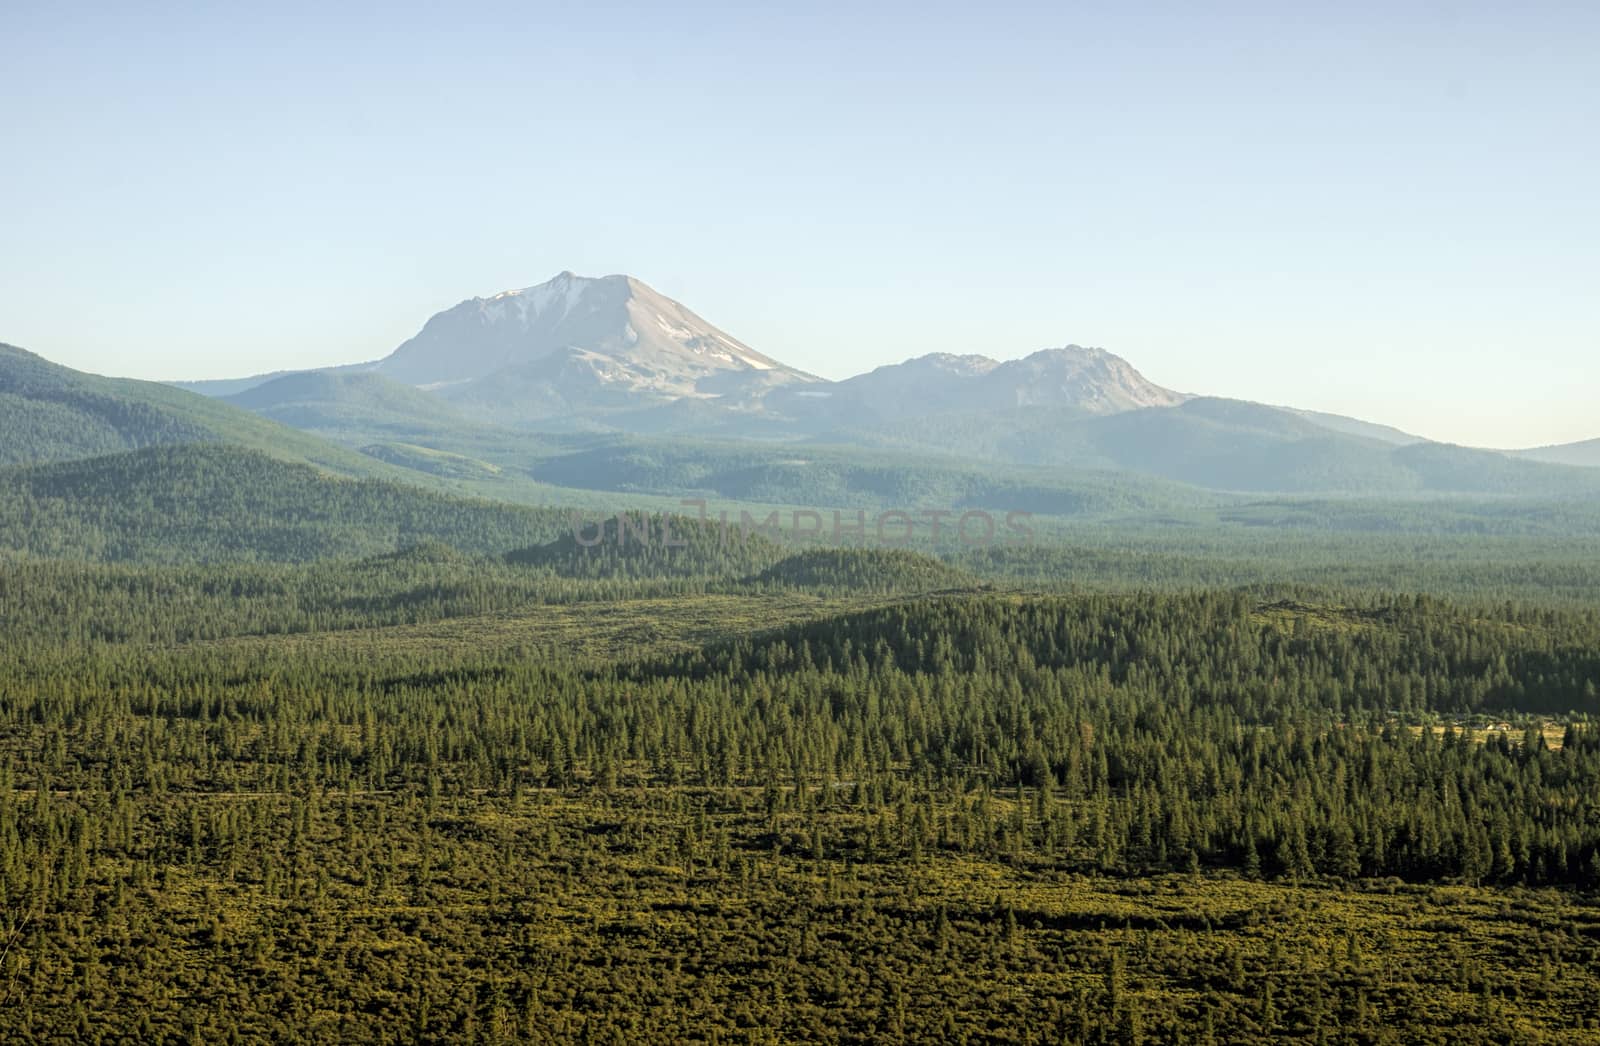 Mount Lassen in July Afternoon by whitechild